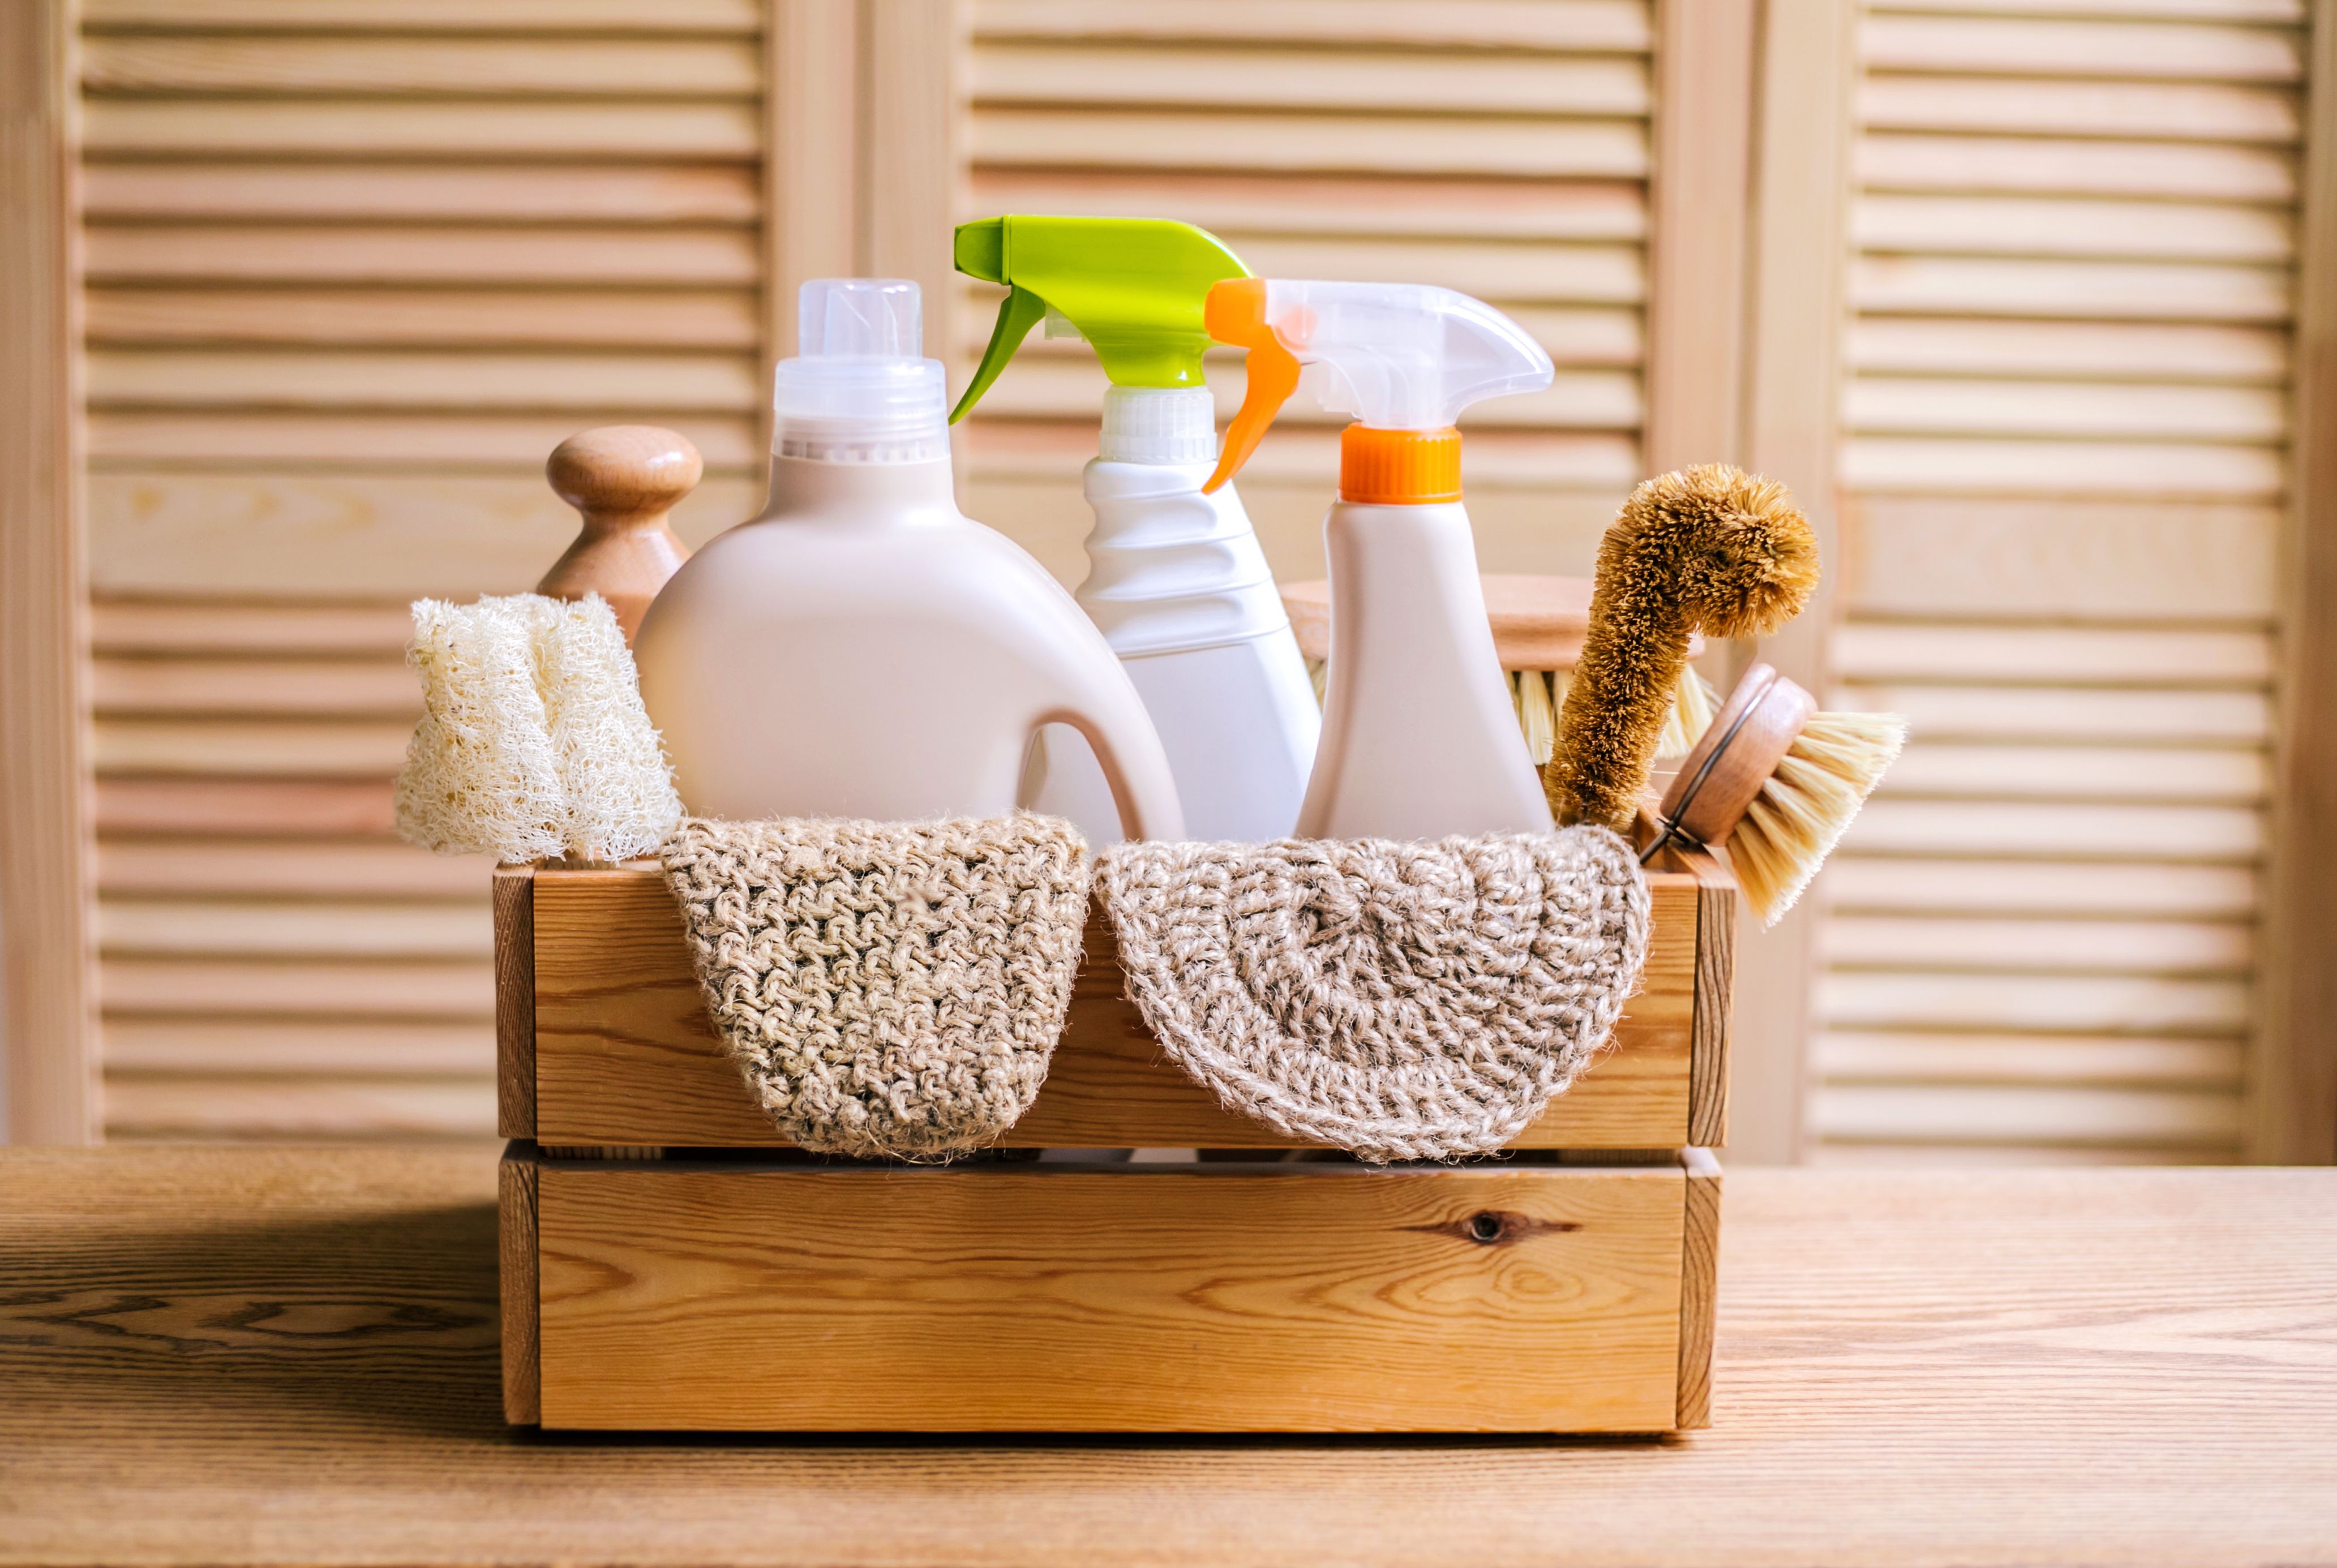 15 Must-Know Spring Cleaning Tips From the Pros